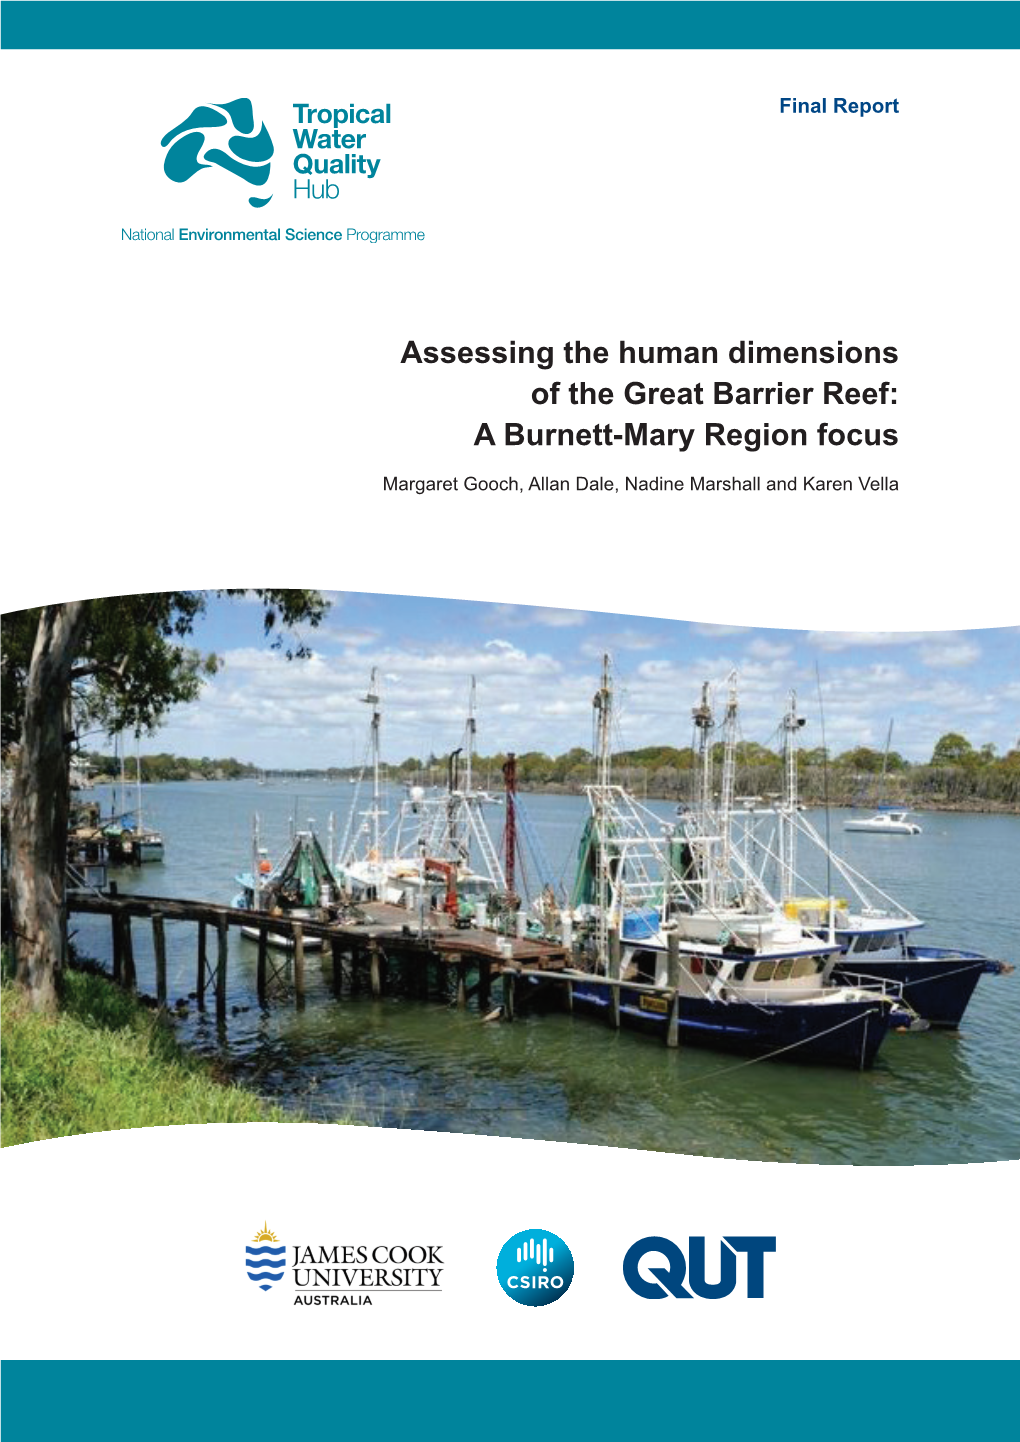 Assessing the Human Dimensions of the Great Barrier Reef: a Burnett-Mary Region Focus